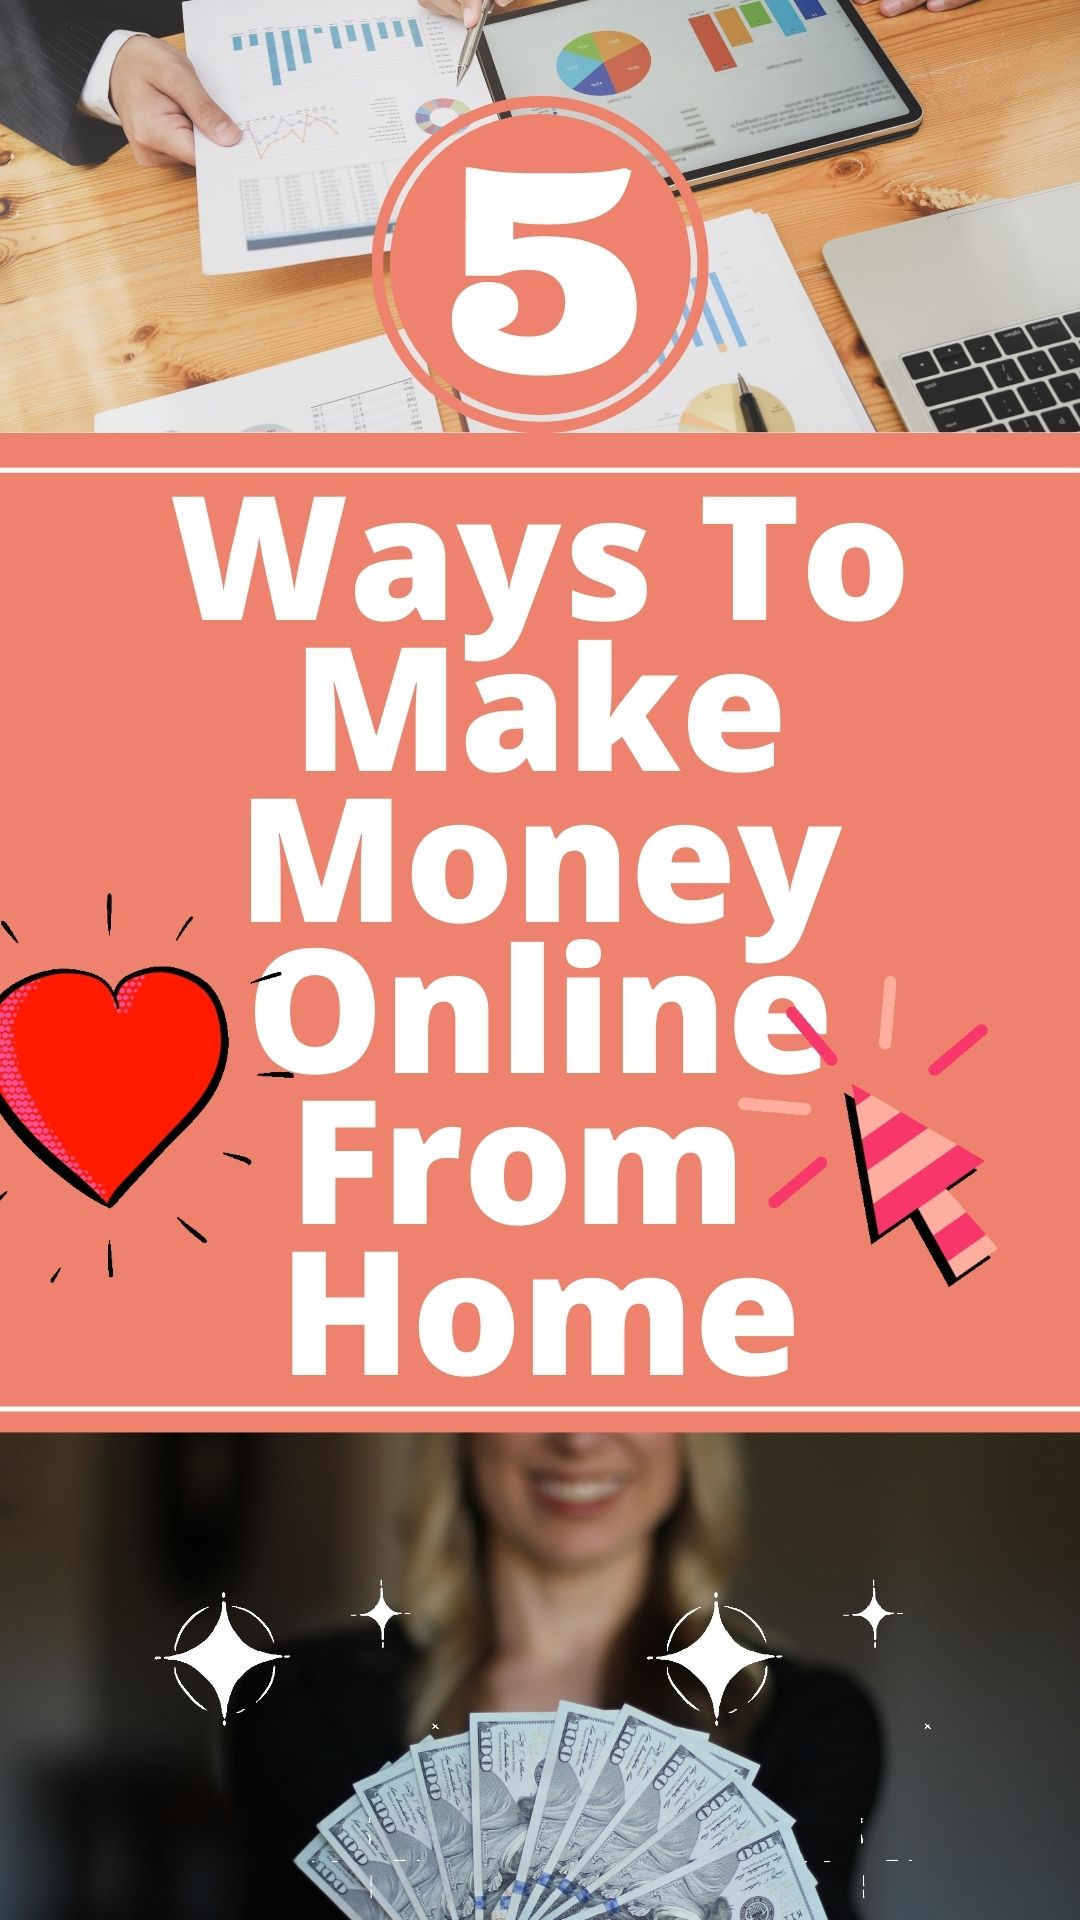 5 Ways To Make Money Online From Home